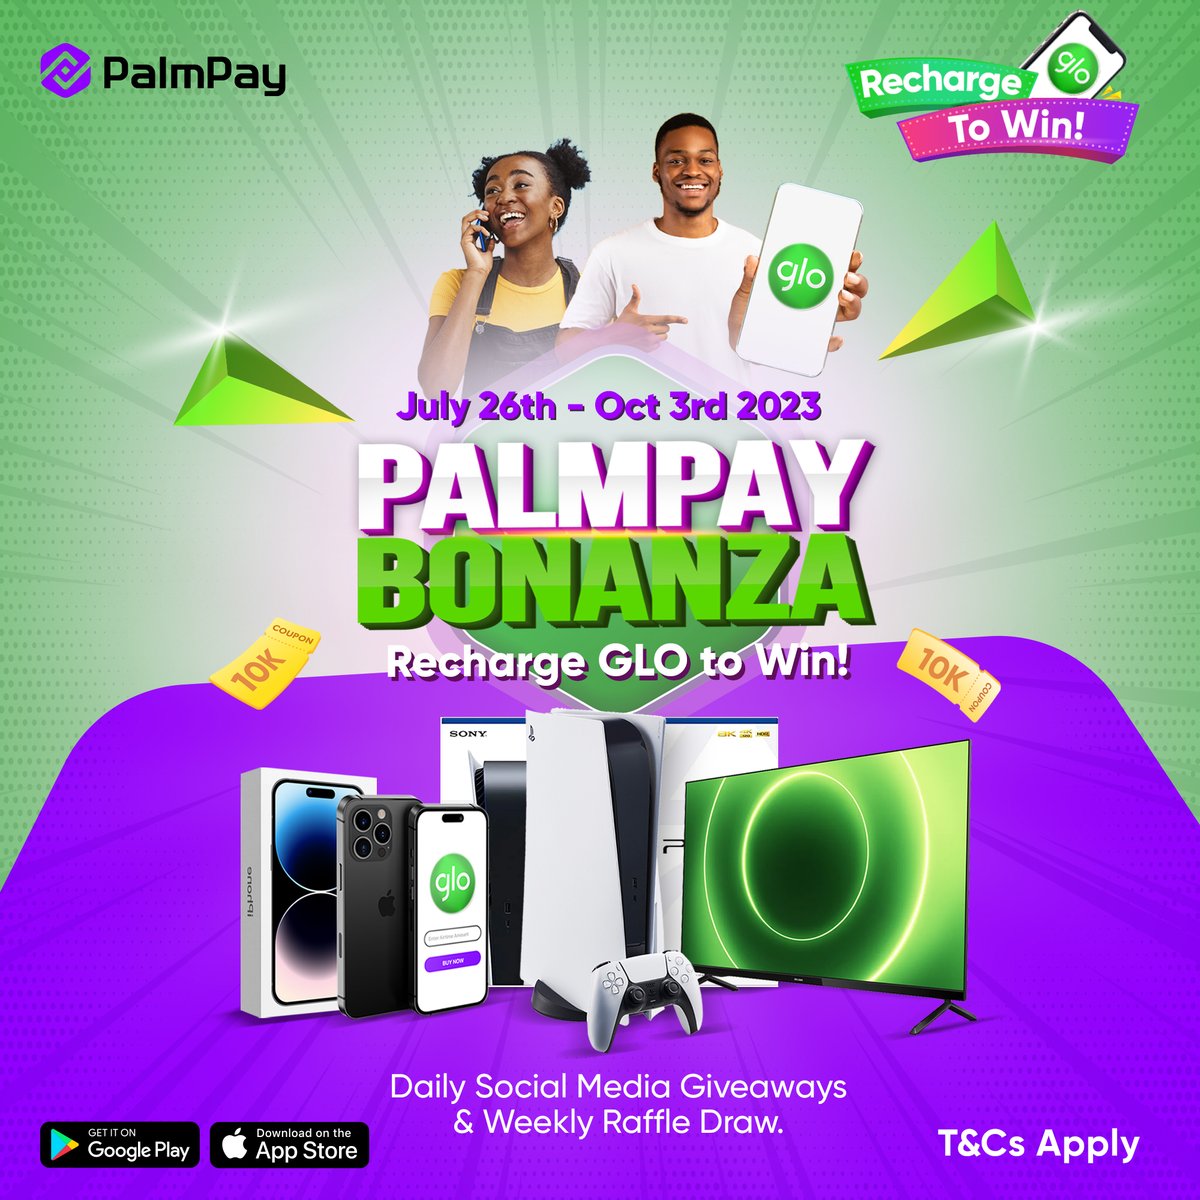 This one is huge!
The Biggest airtime and data Bonanza of the year don land! PalmPay Bonanza Recharge Glo to win is here!!

To participate, just top up a GLO line from your PalmPay app with at least N300 and you automatically qualify to win prizes like Smart TV, PS5, iPhone 14… https://t.co/zQ0YkinkeI https://t.co/CLJAe1nWTL